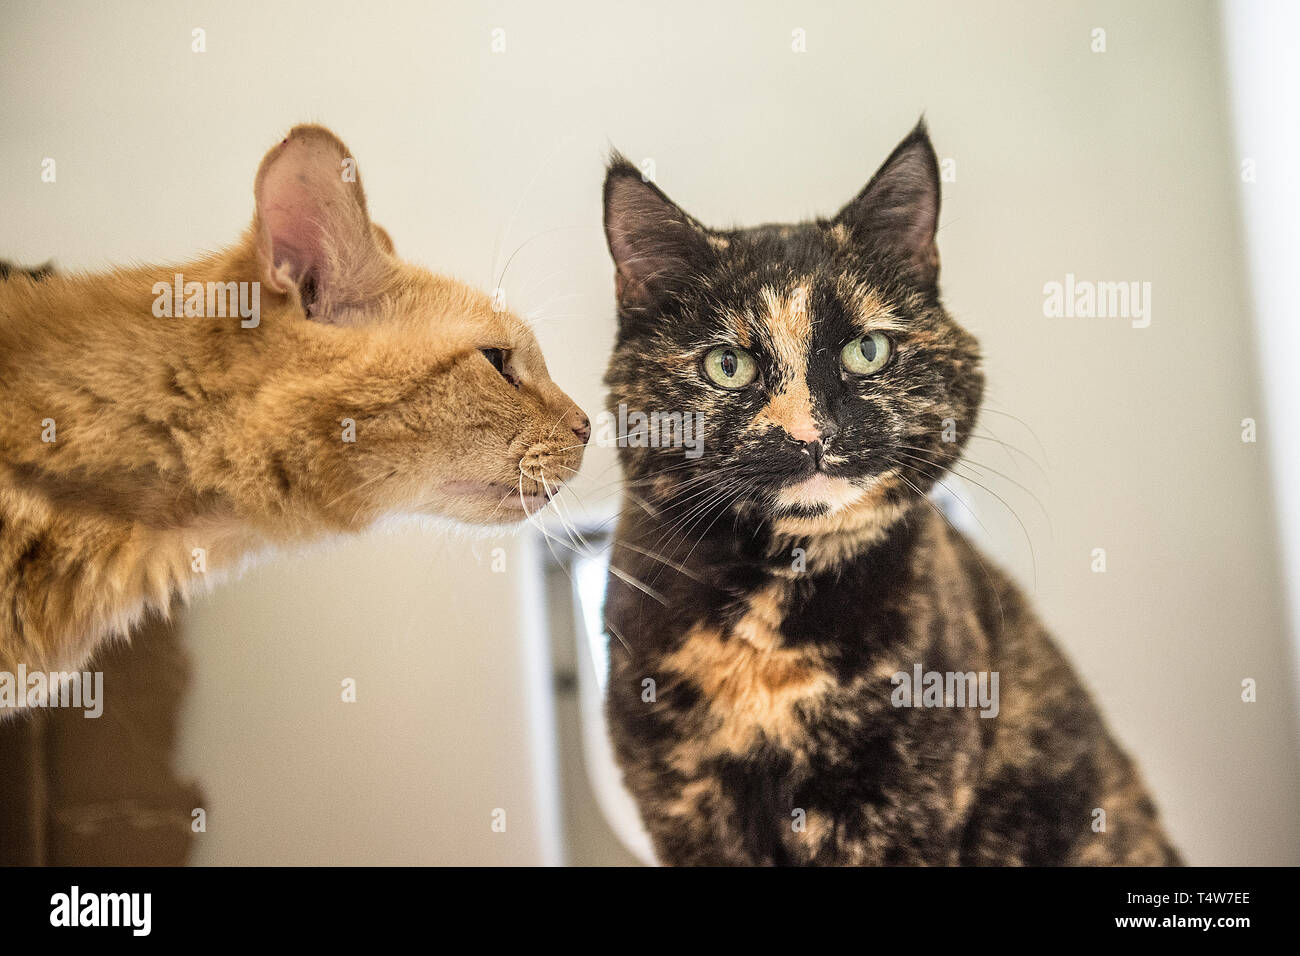 cat meeting a new cat in the home Stock Photo